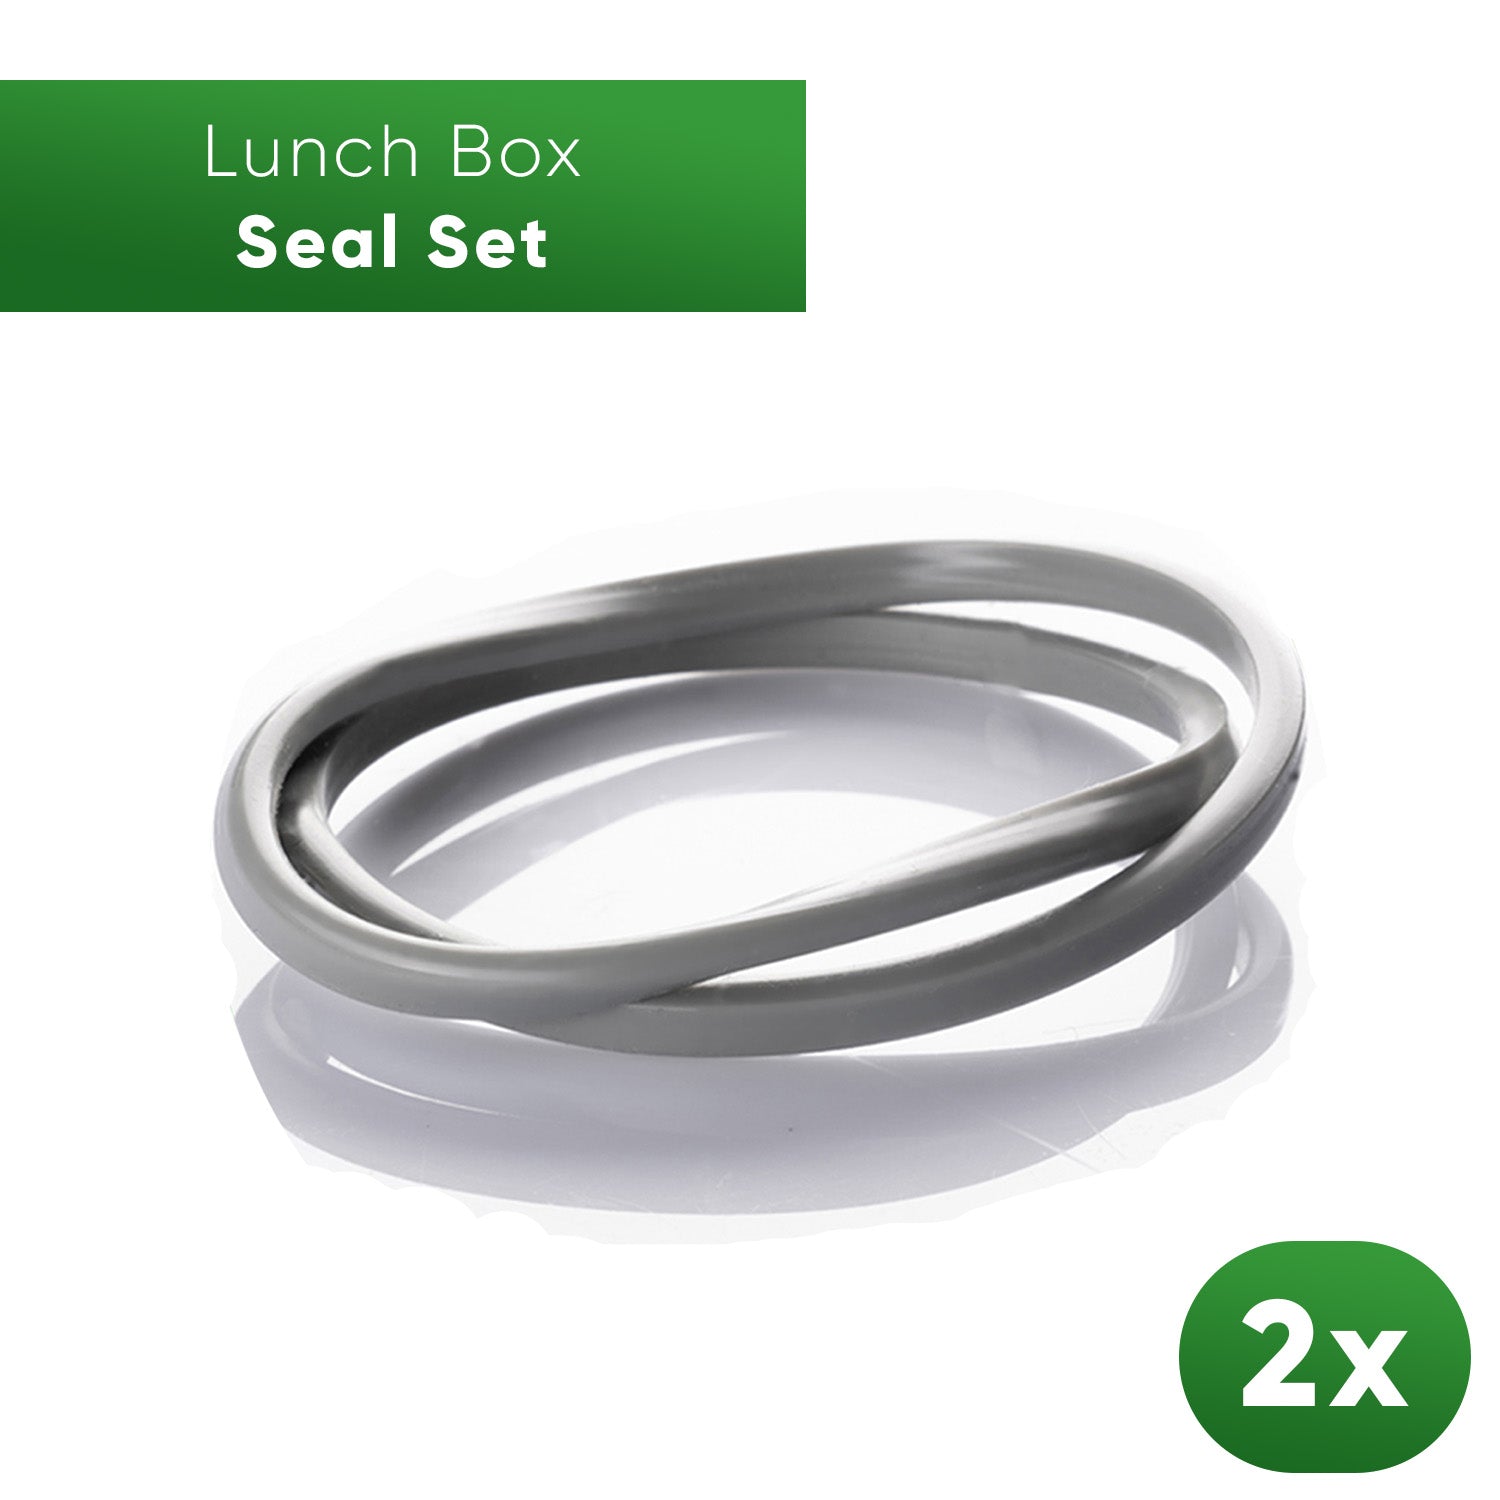 Stainless Steel Lunch Box - Seal Set